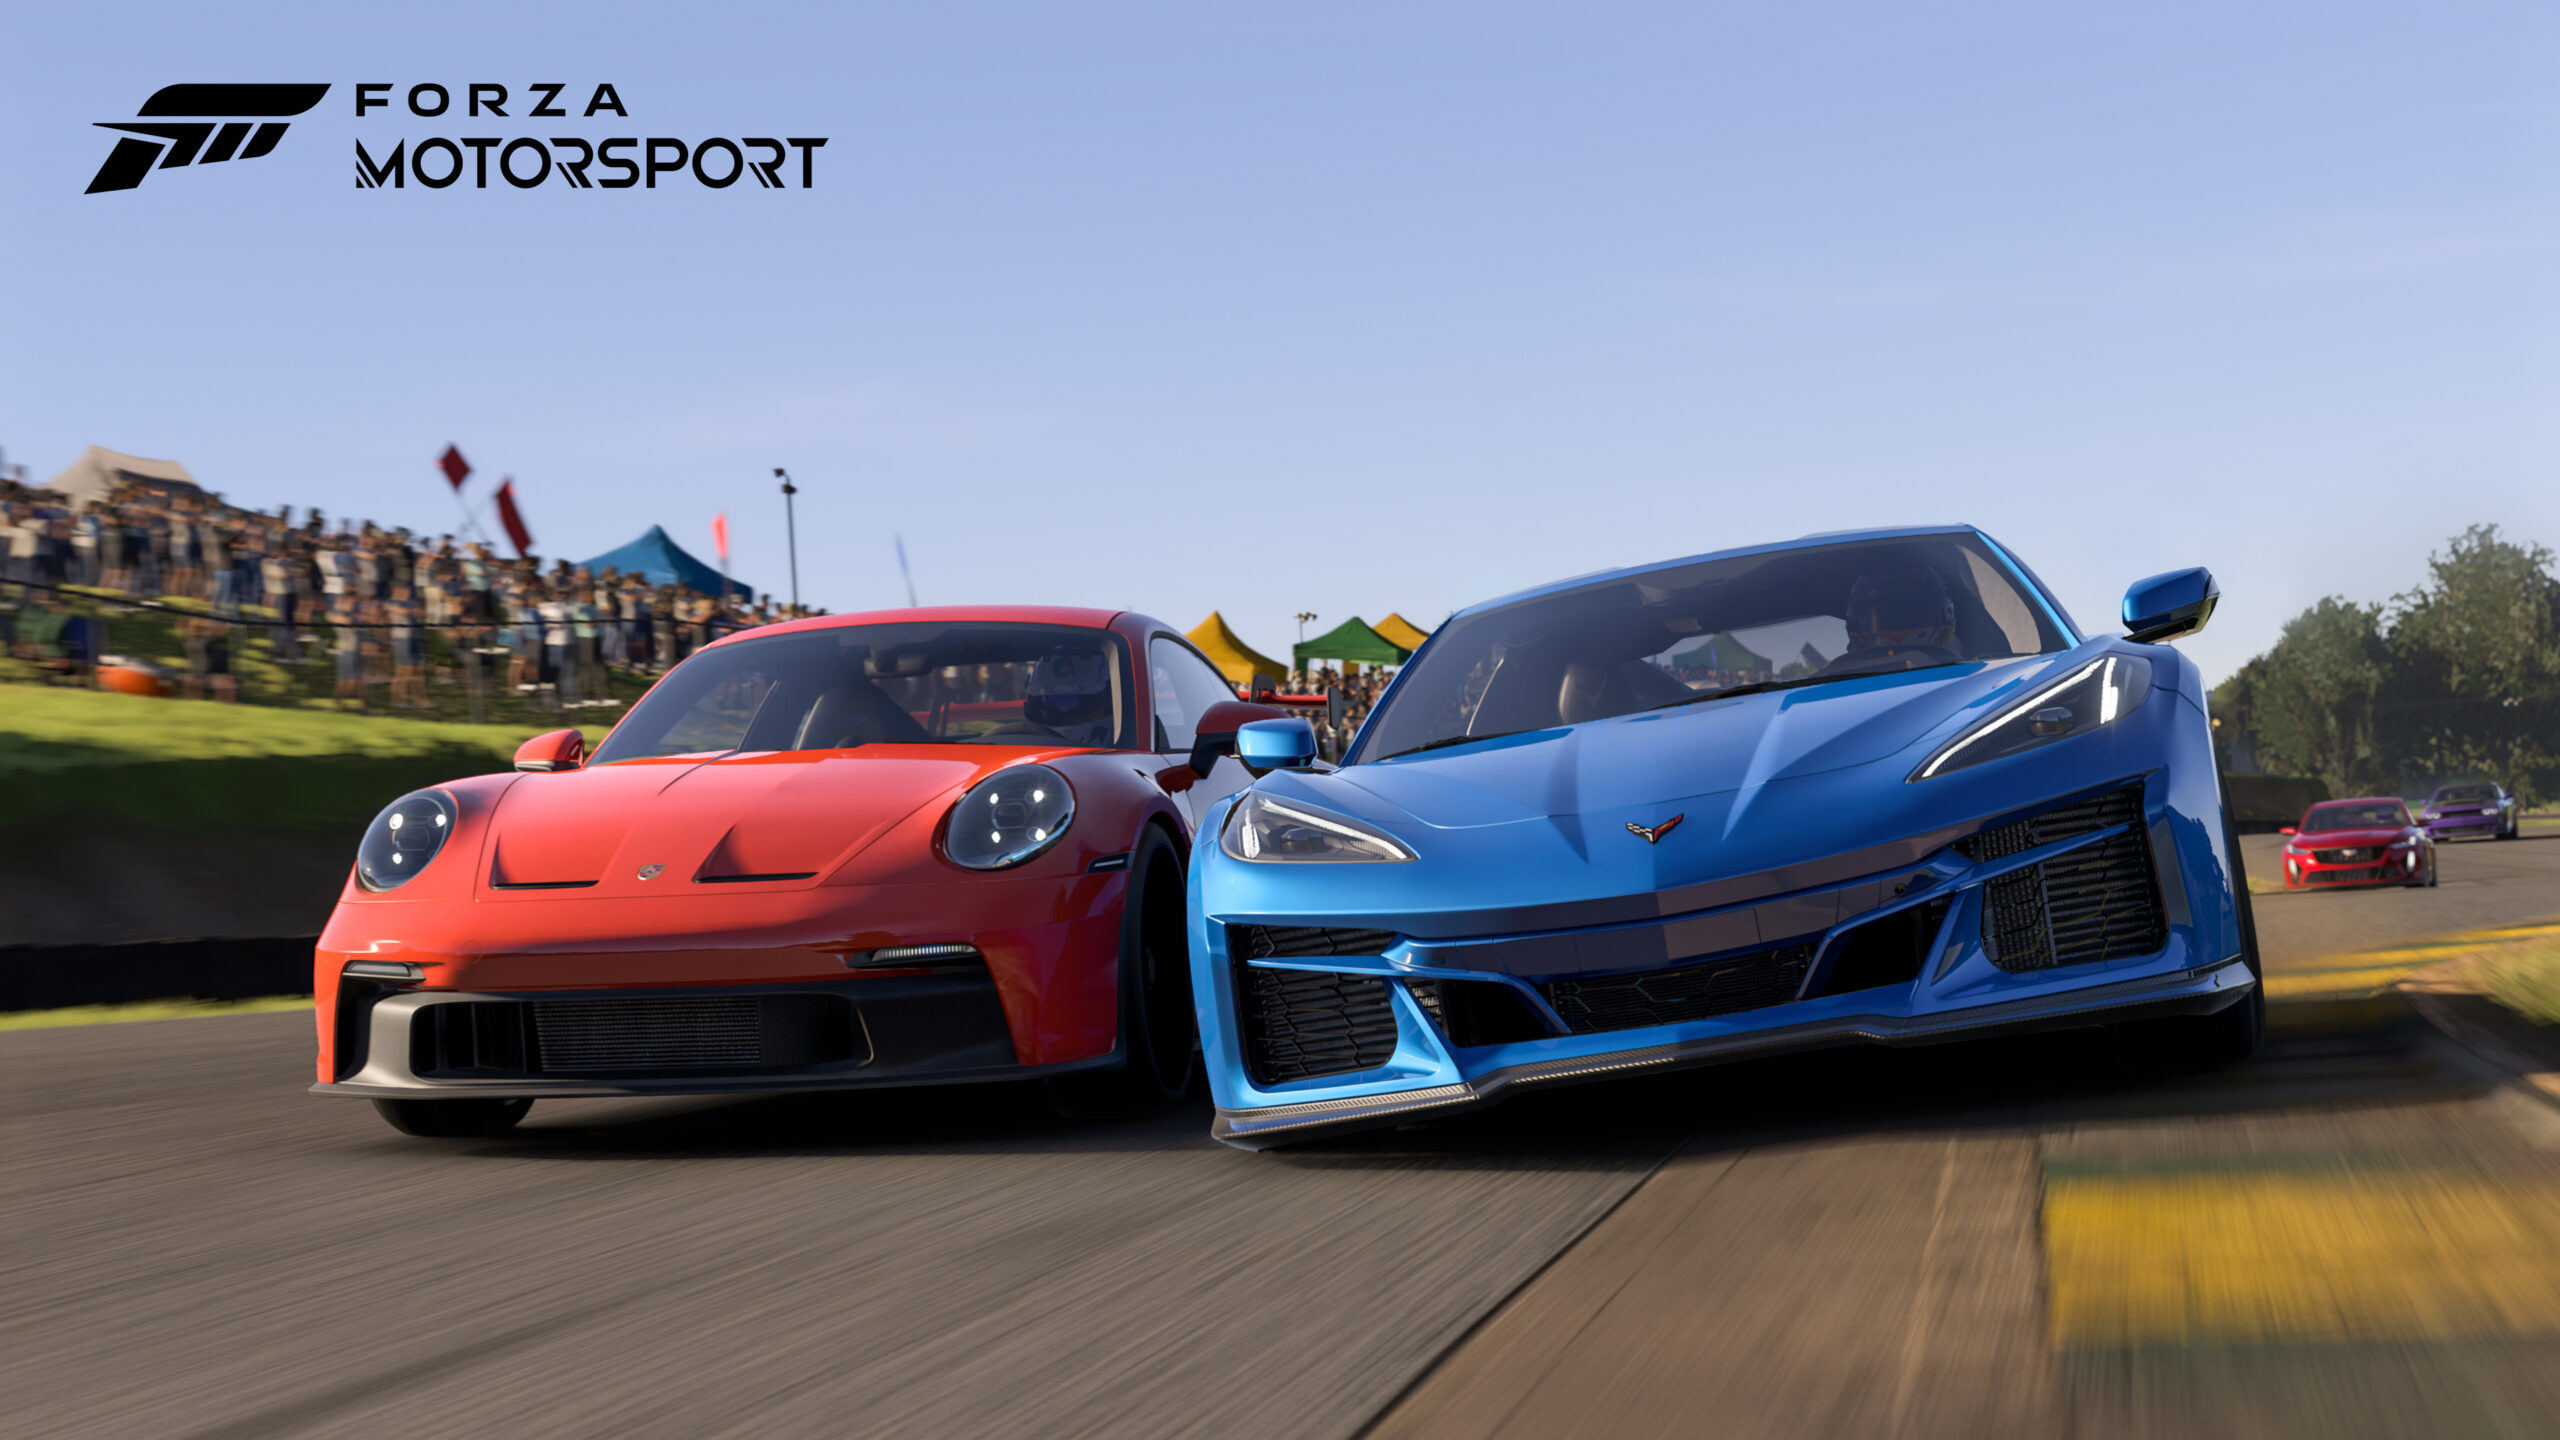 Everything We Know about Forza Horizon 5